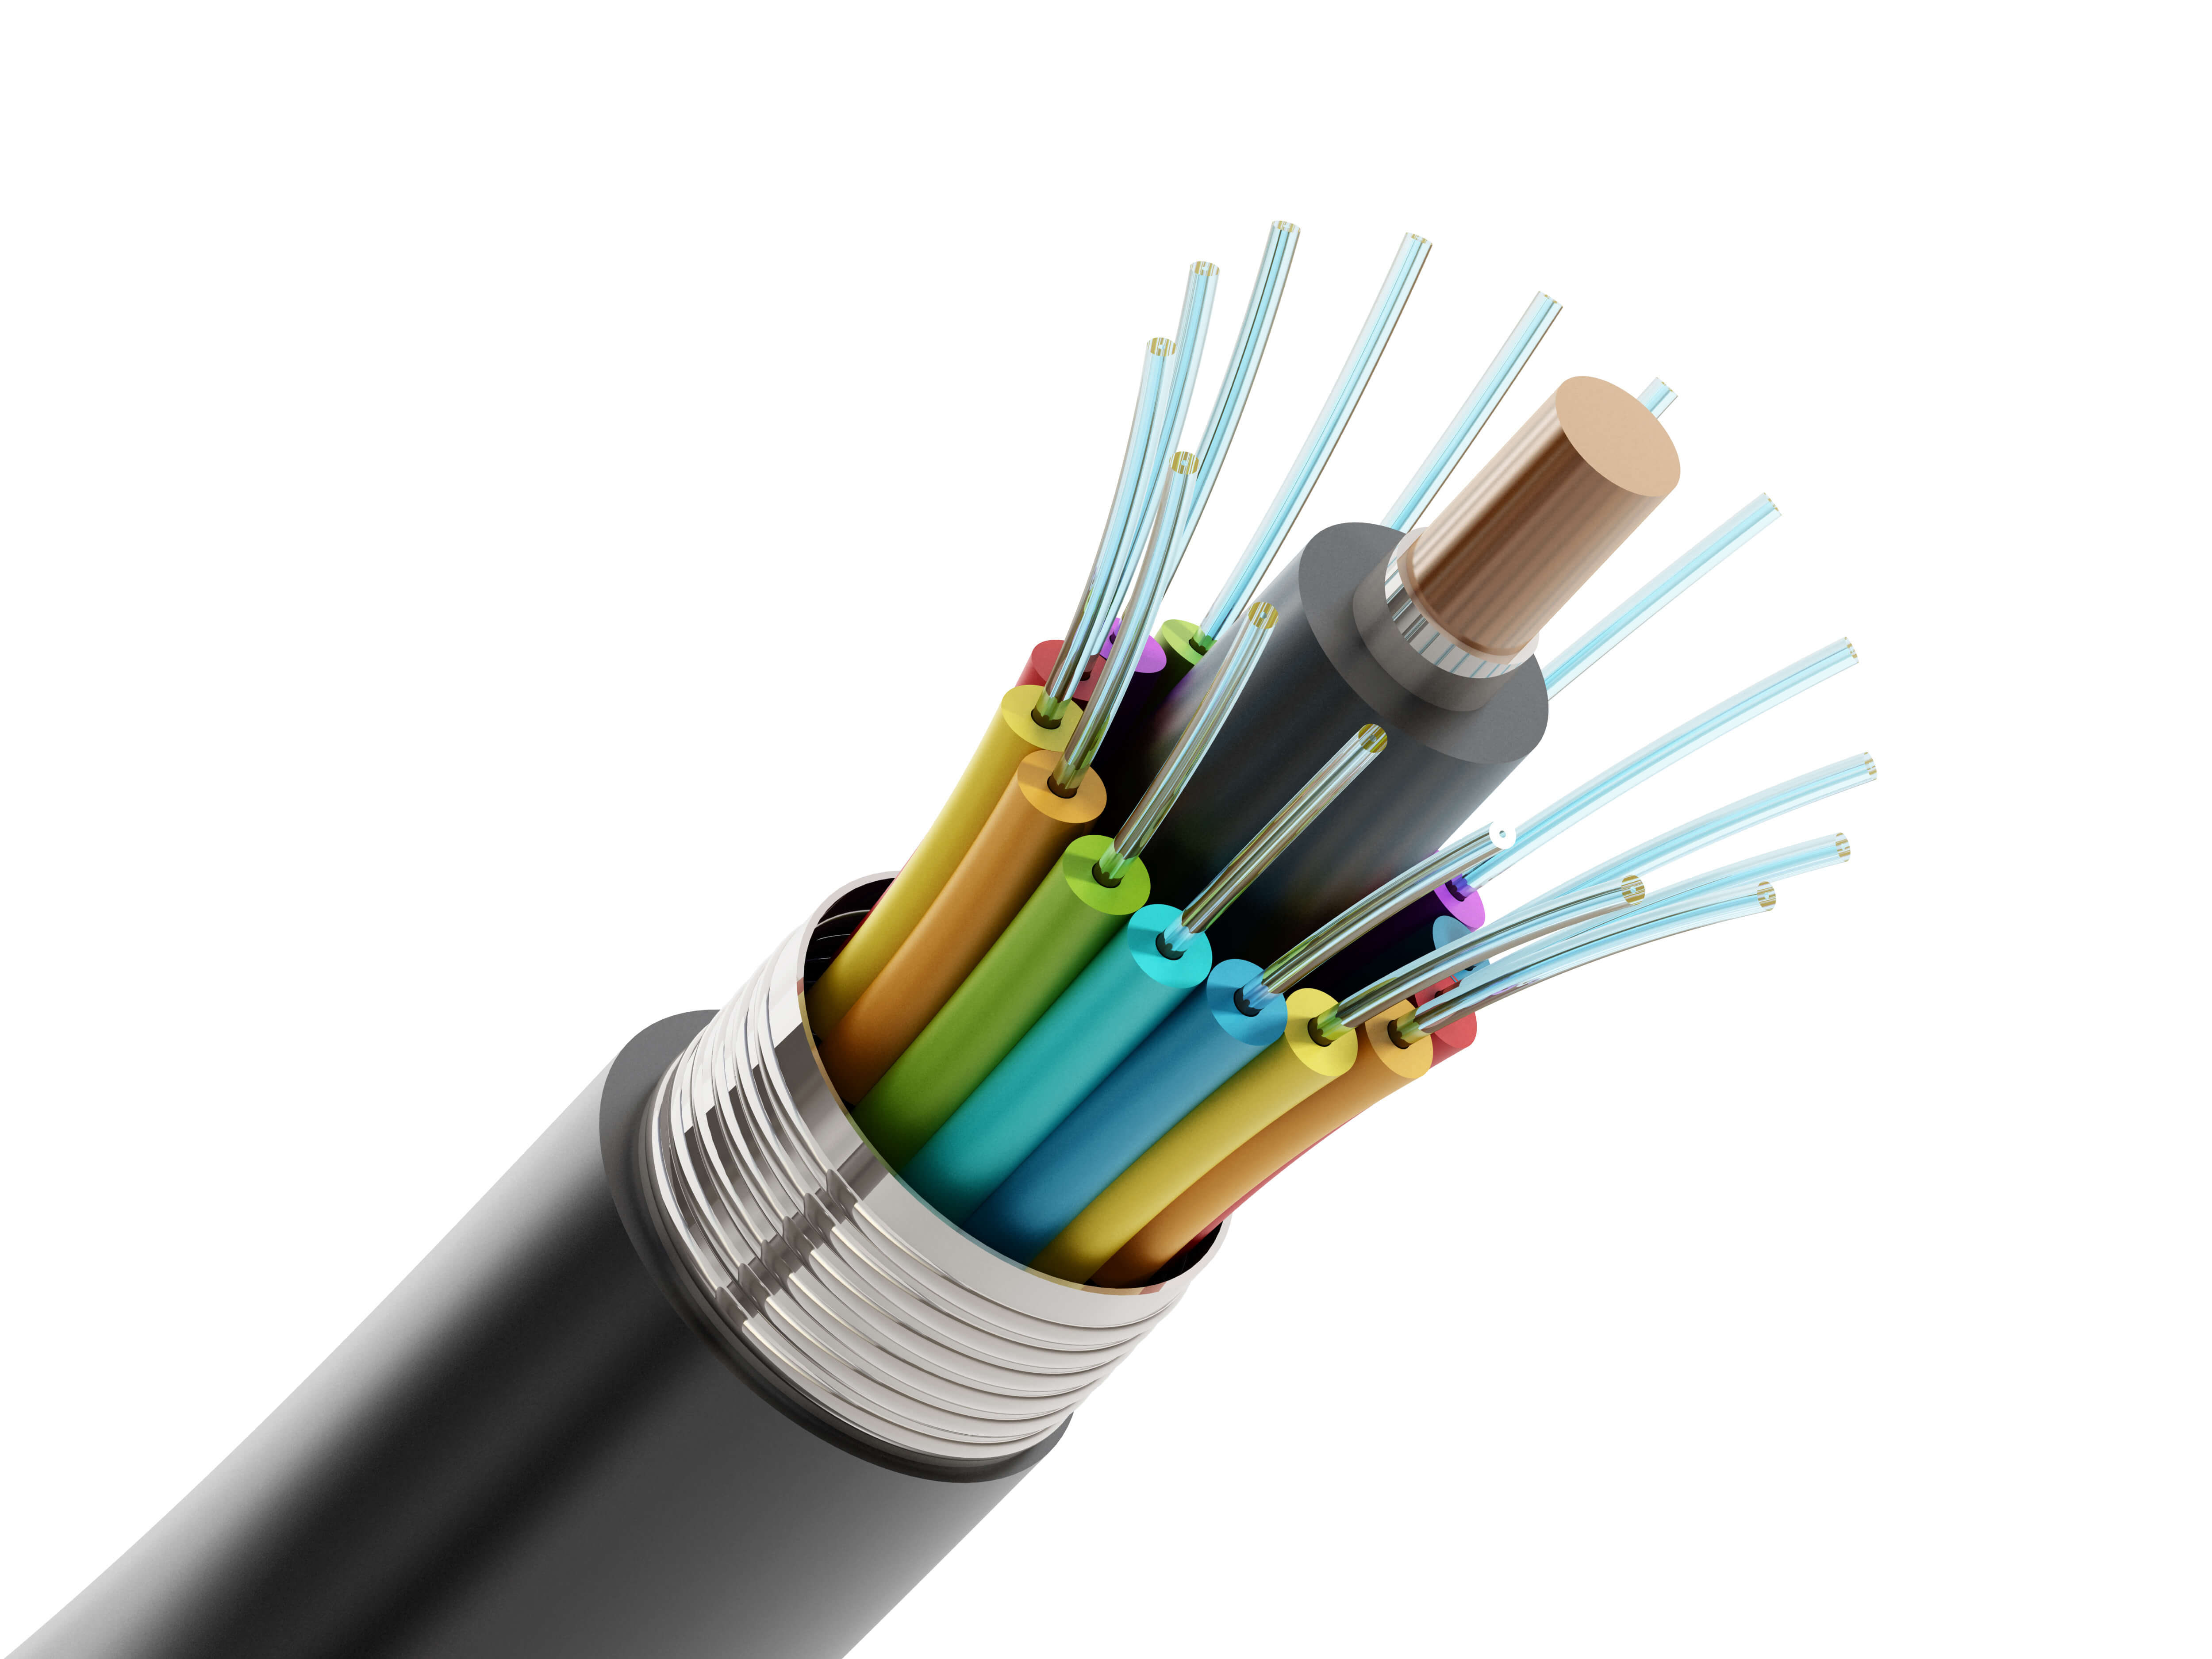 Fiber Optic Cable Definition - What is fiber optic cable?